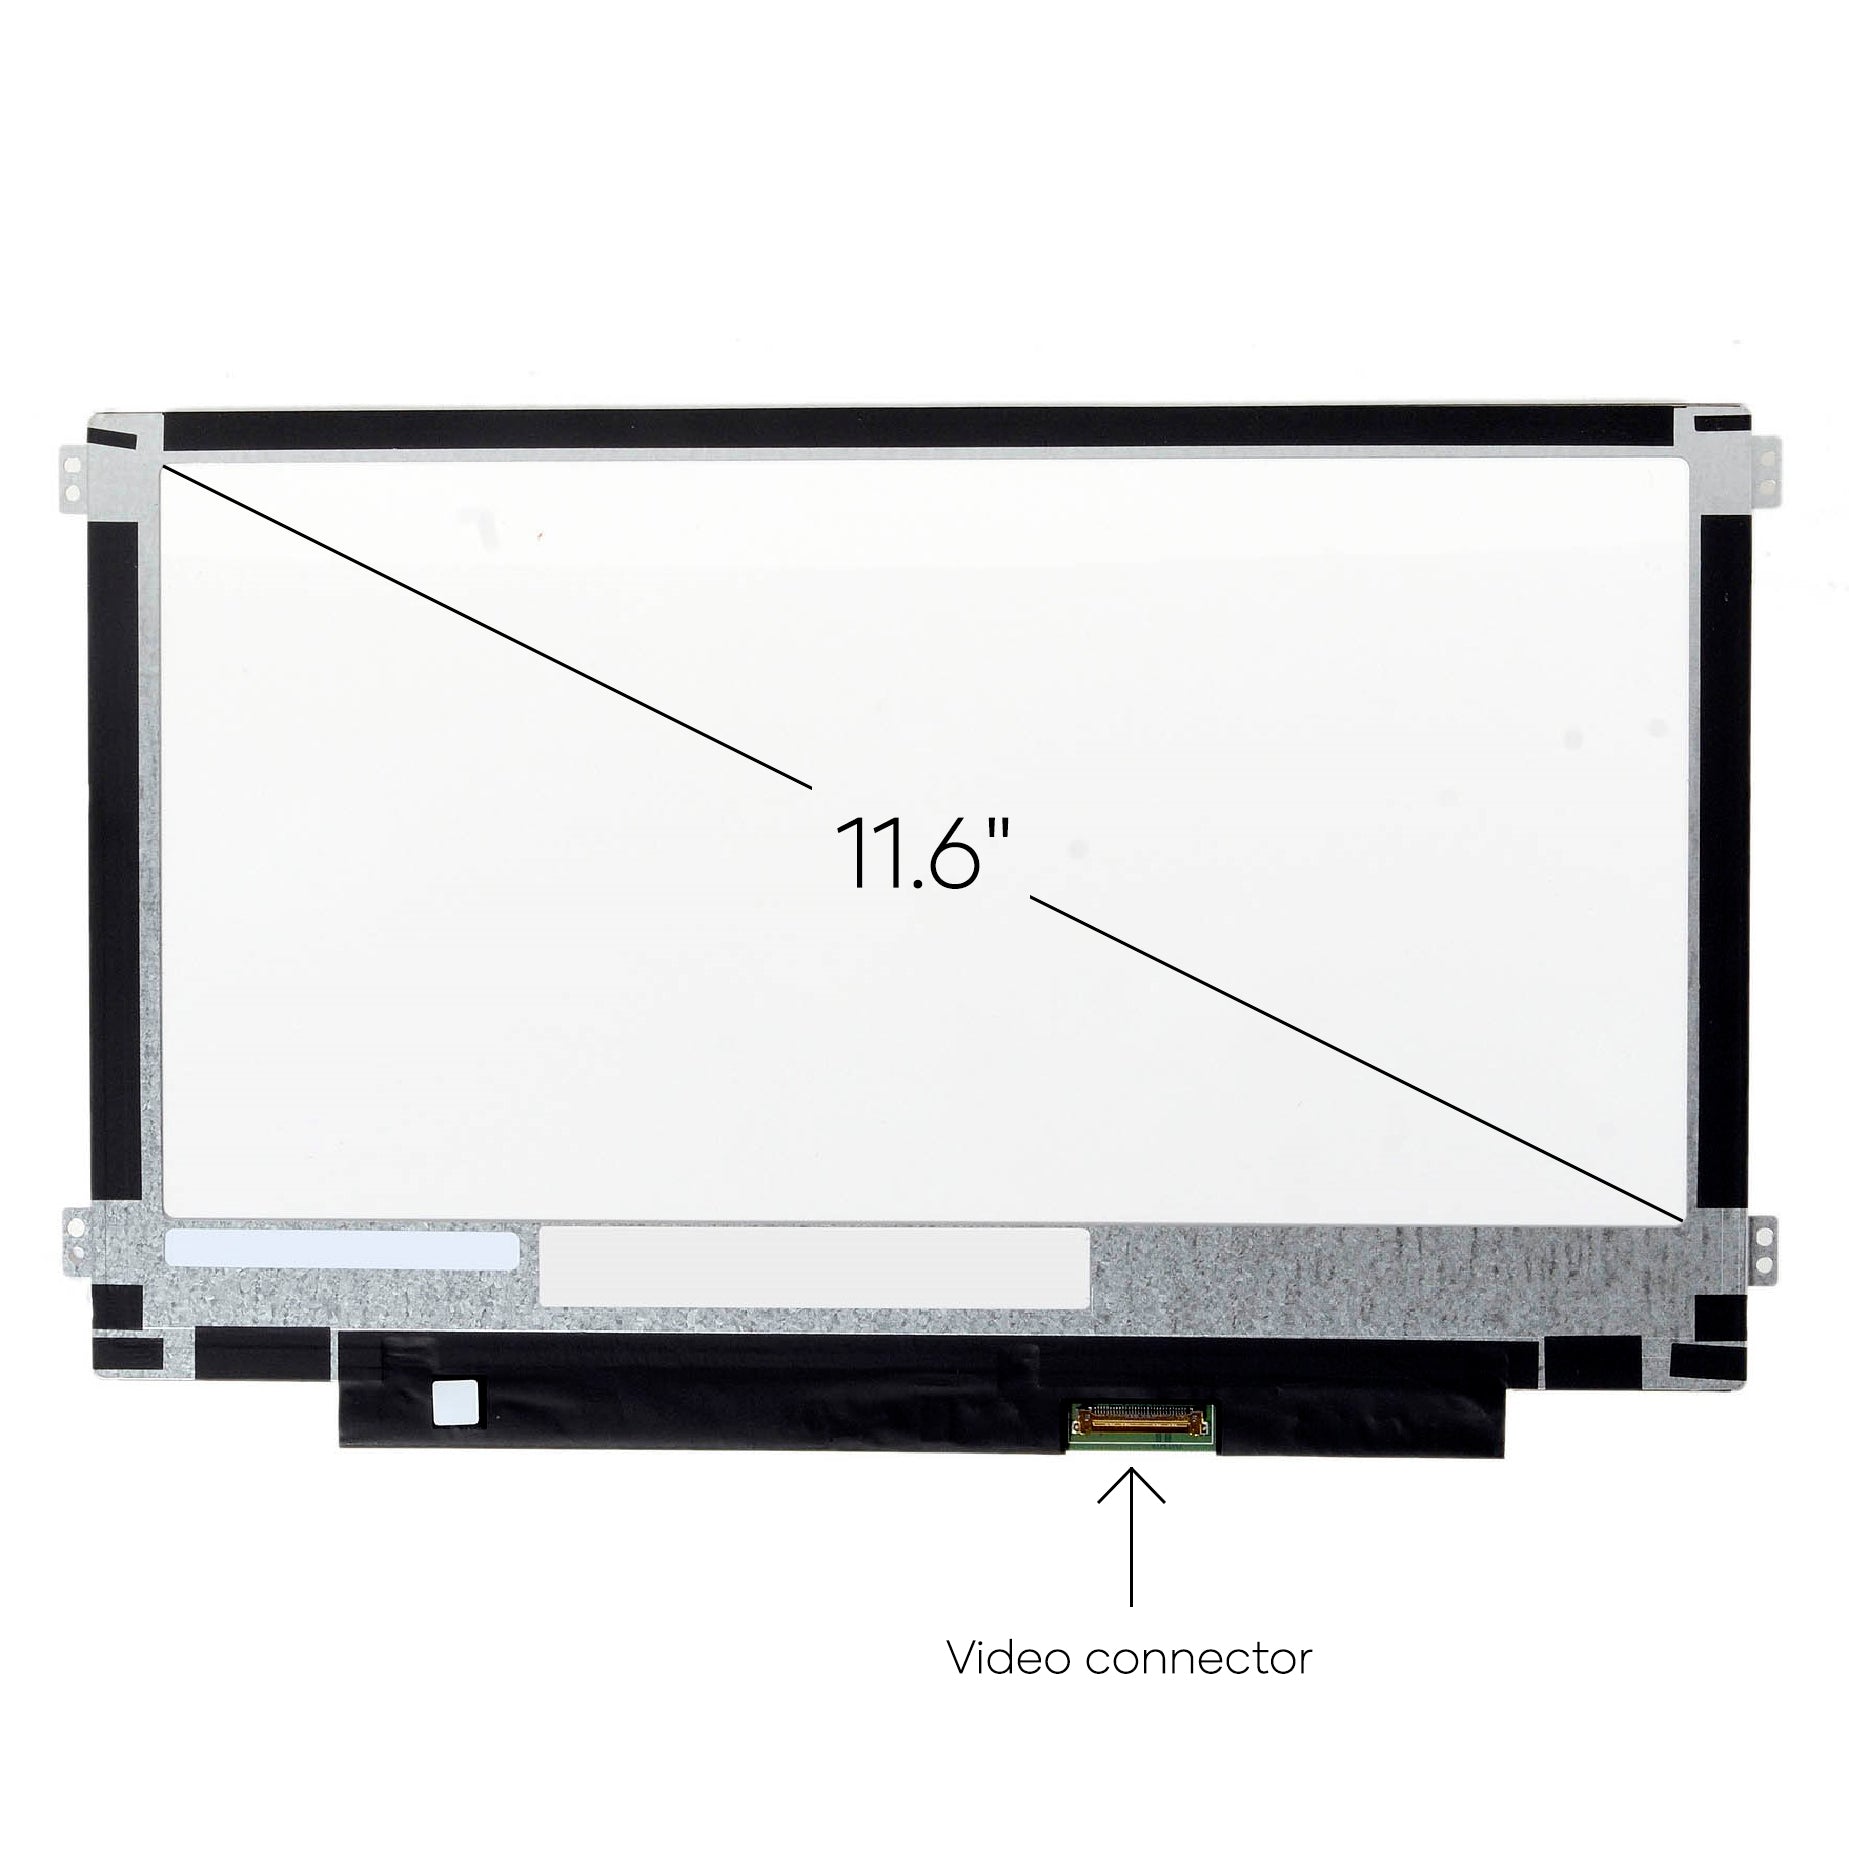 Screen Replacement for Samsung Chromebook XE500C12-K02US HD 1366x768 Matte LCD LED Display